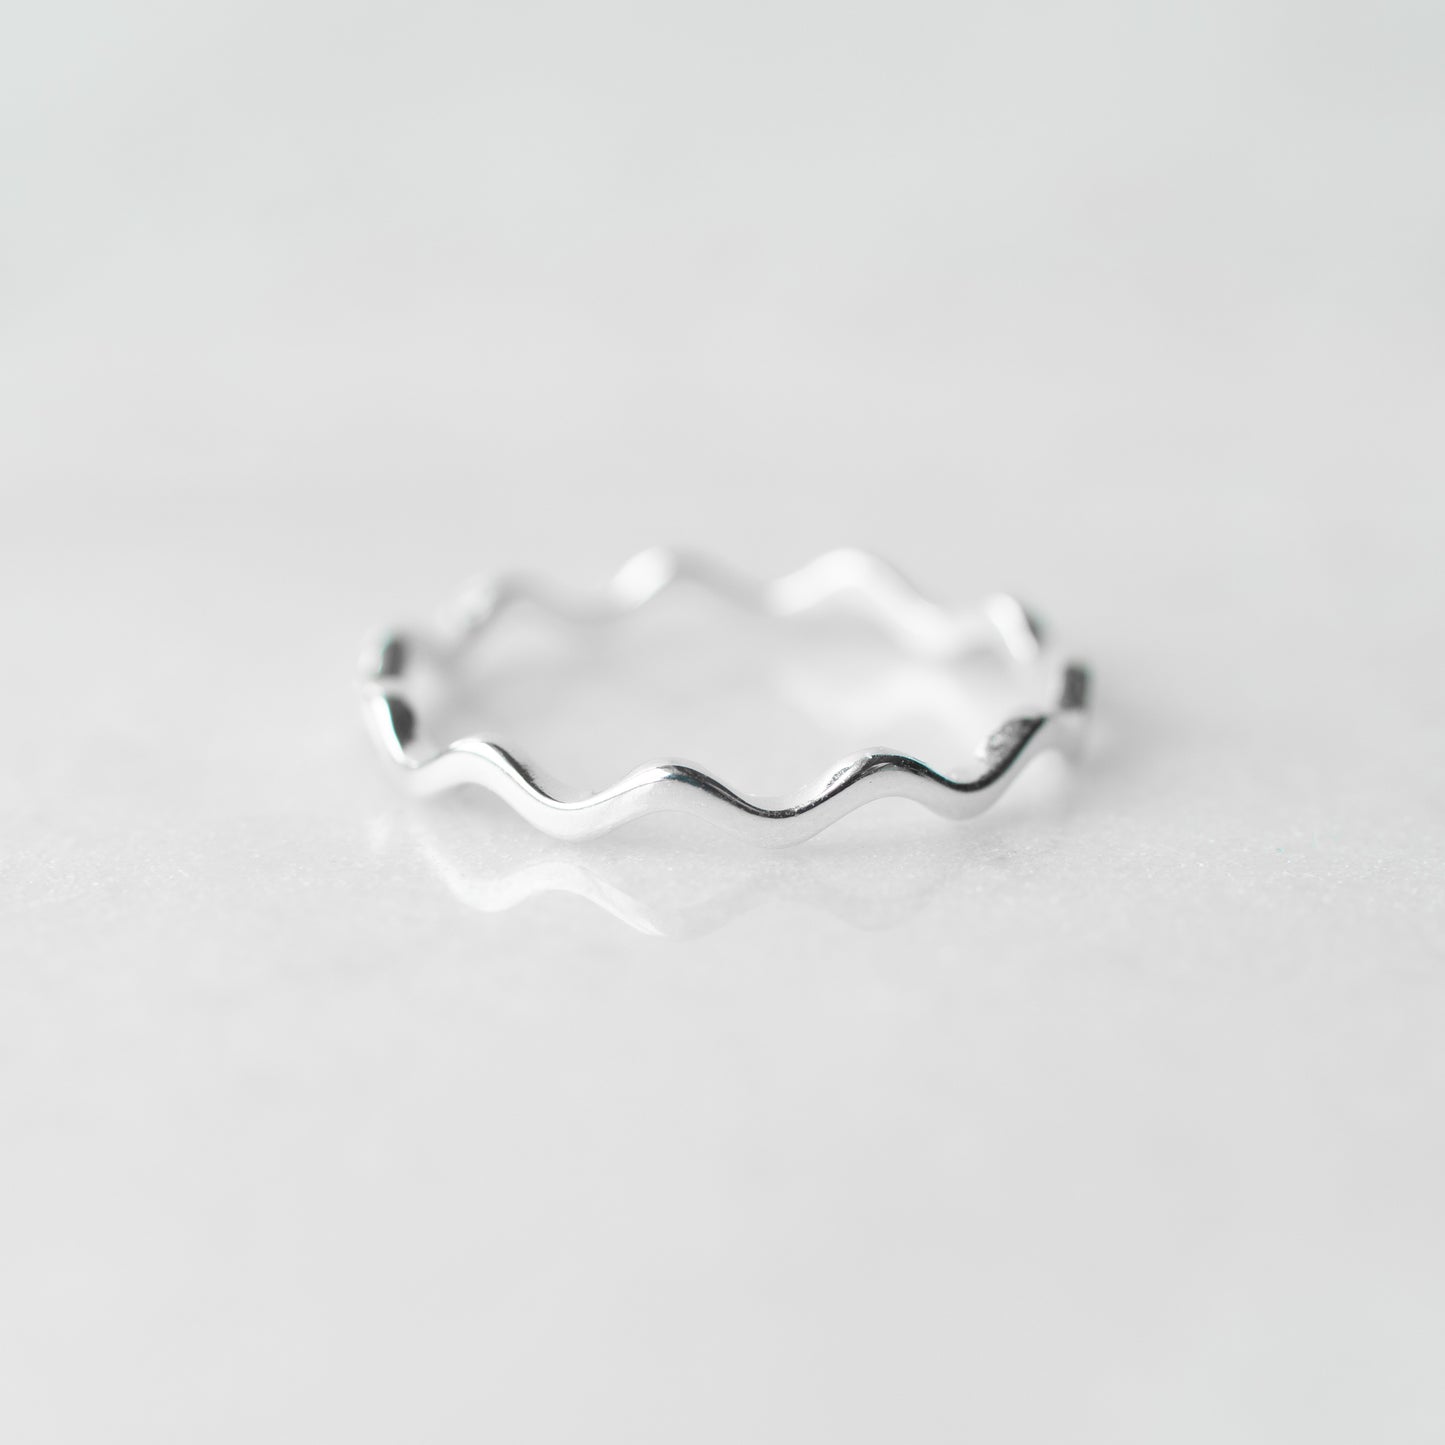 Nalu wave ring in 925 sterling silver